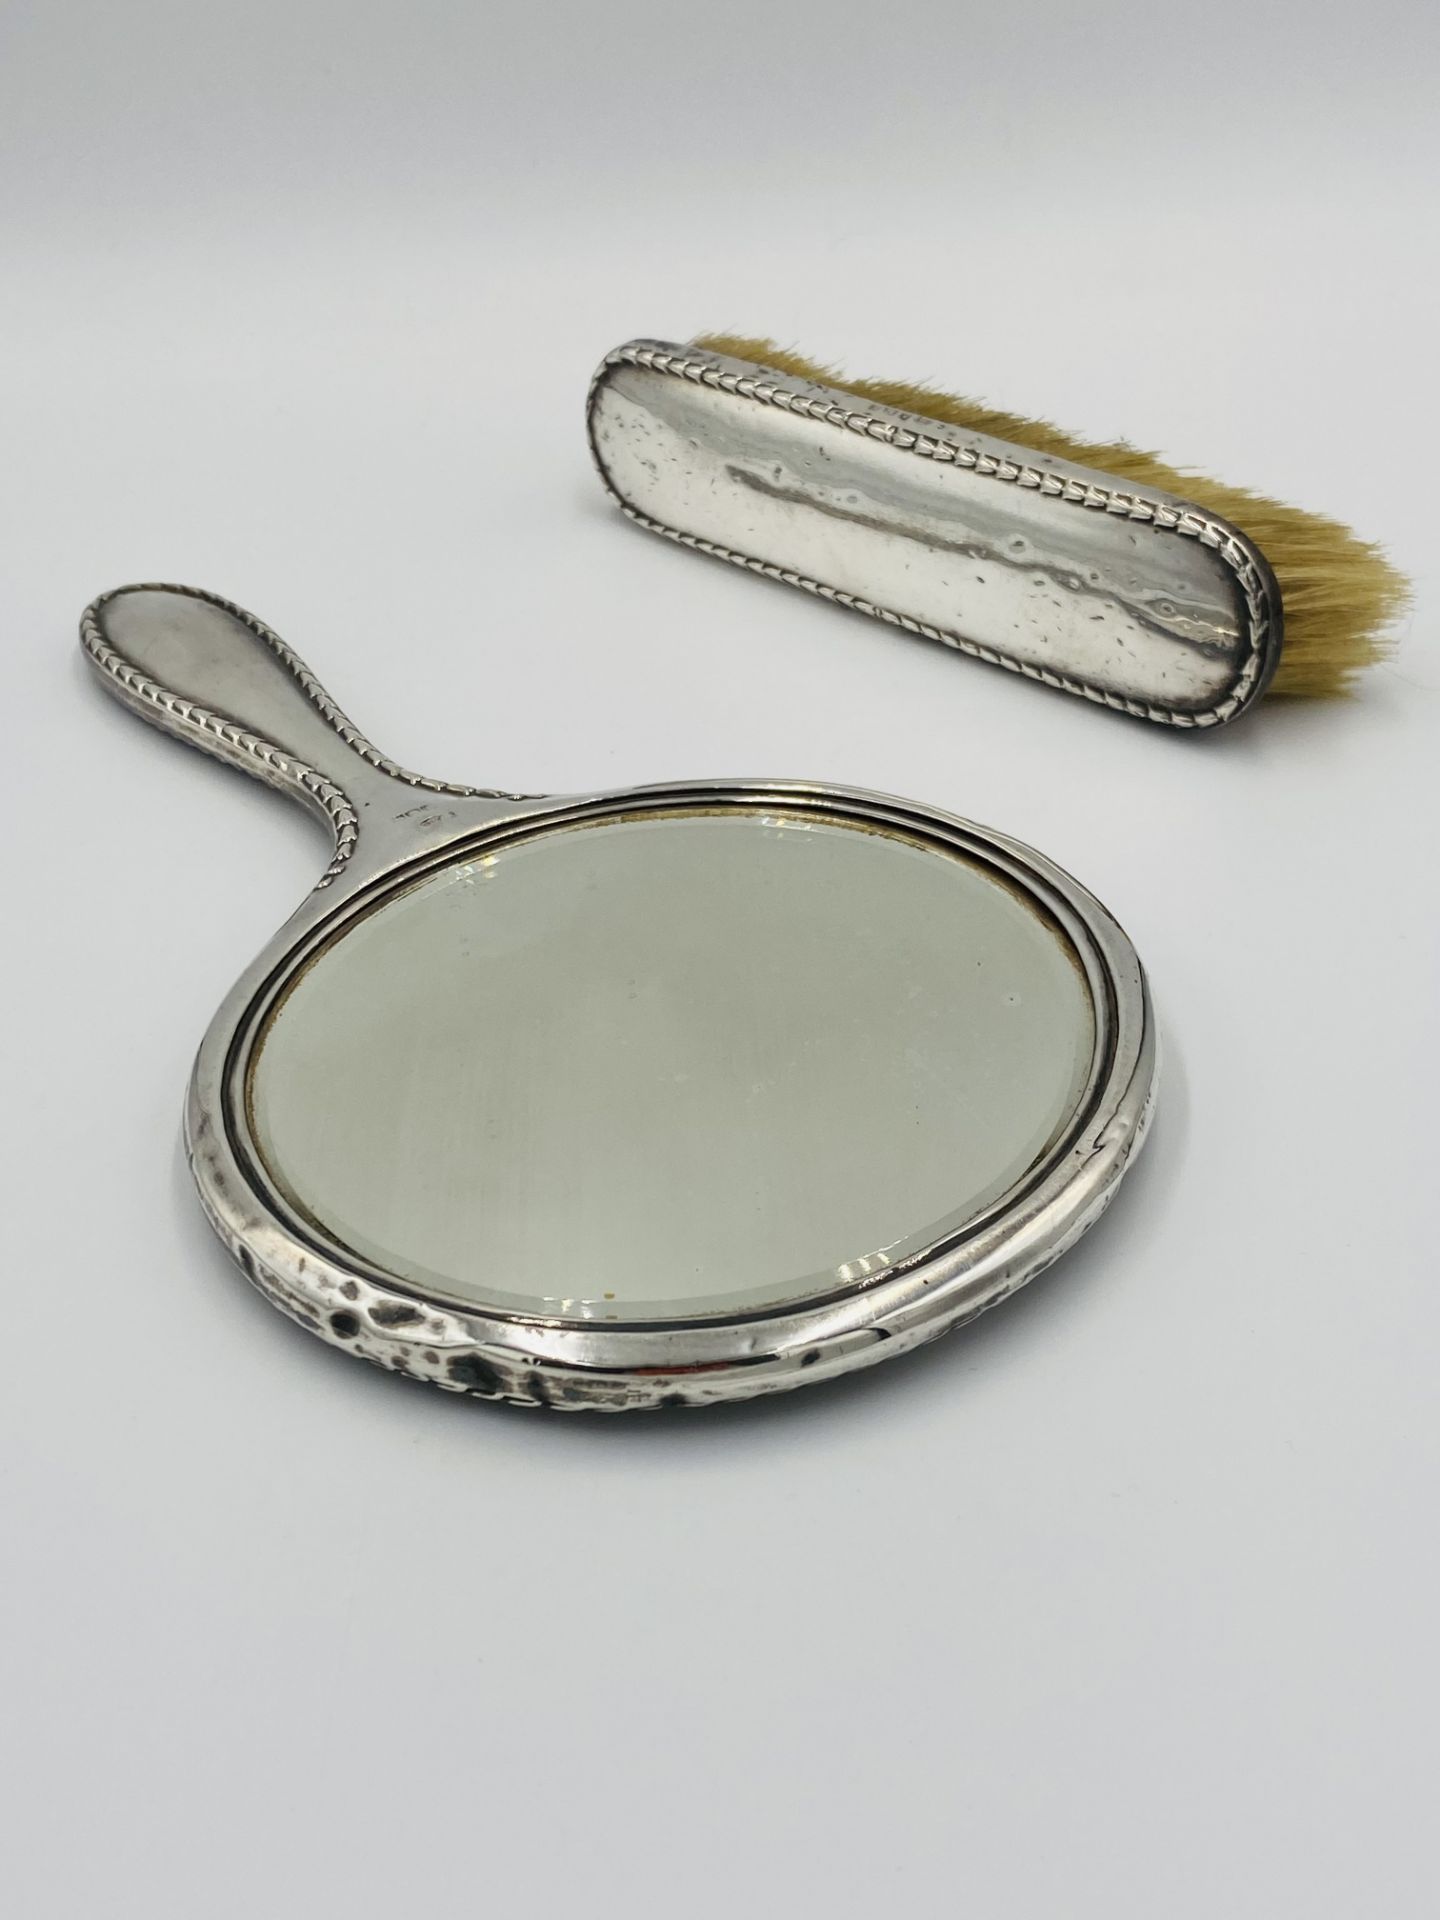 Silver backed dressing table mirror and brush - Image 4 of 6